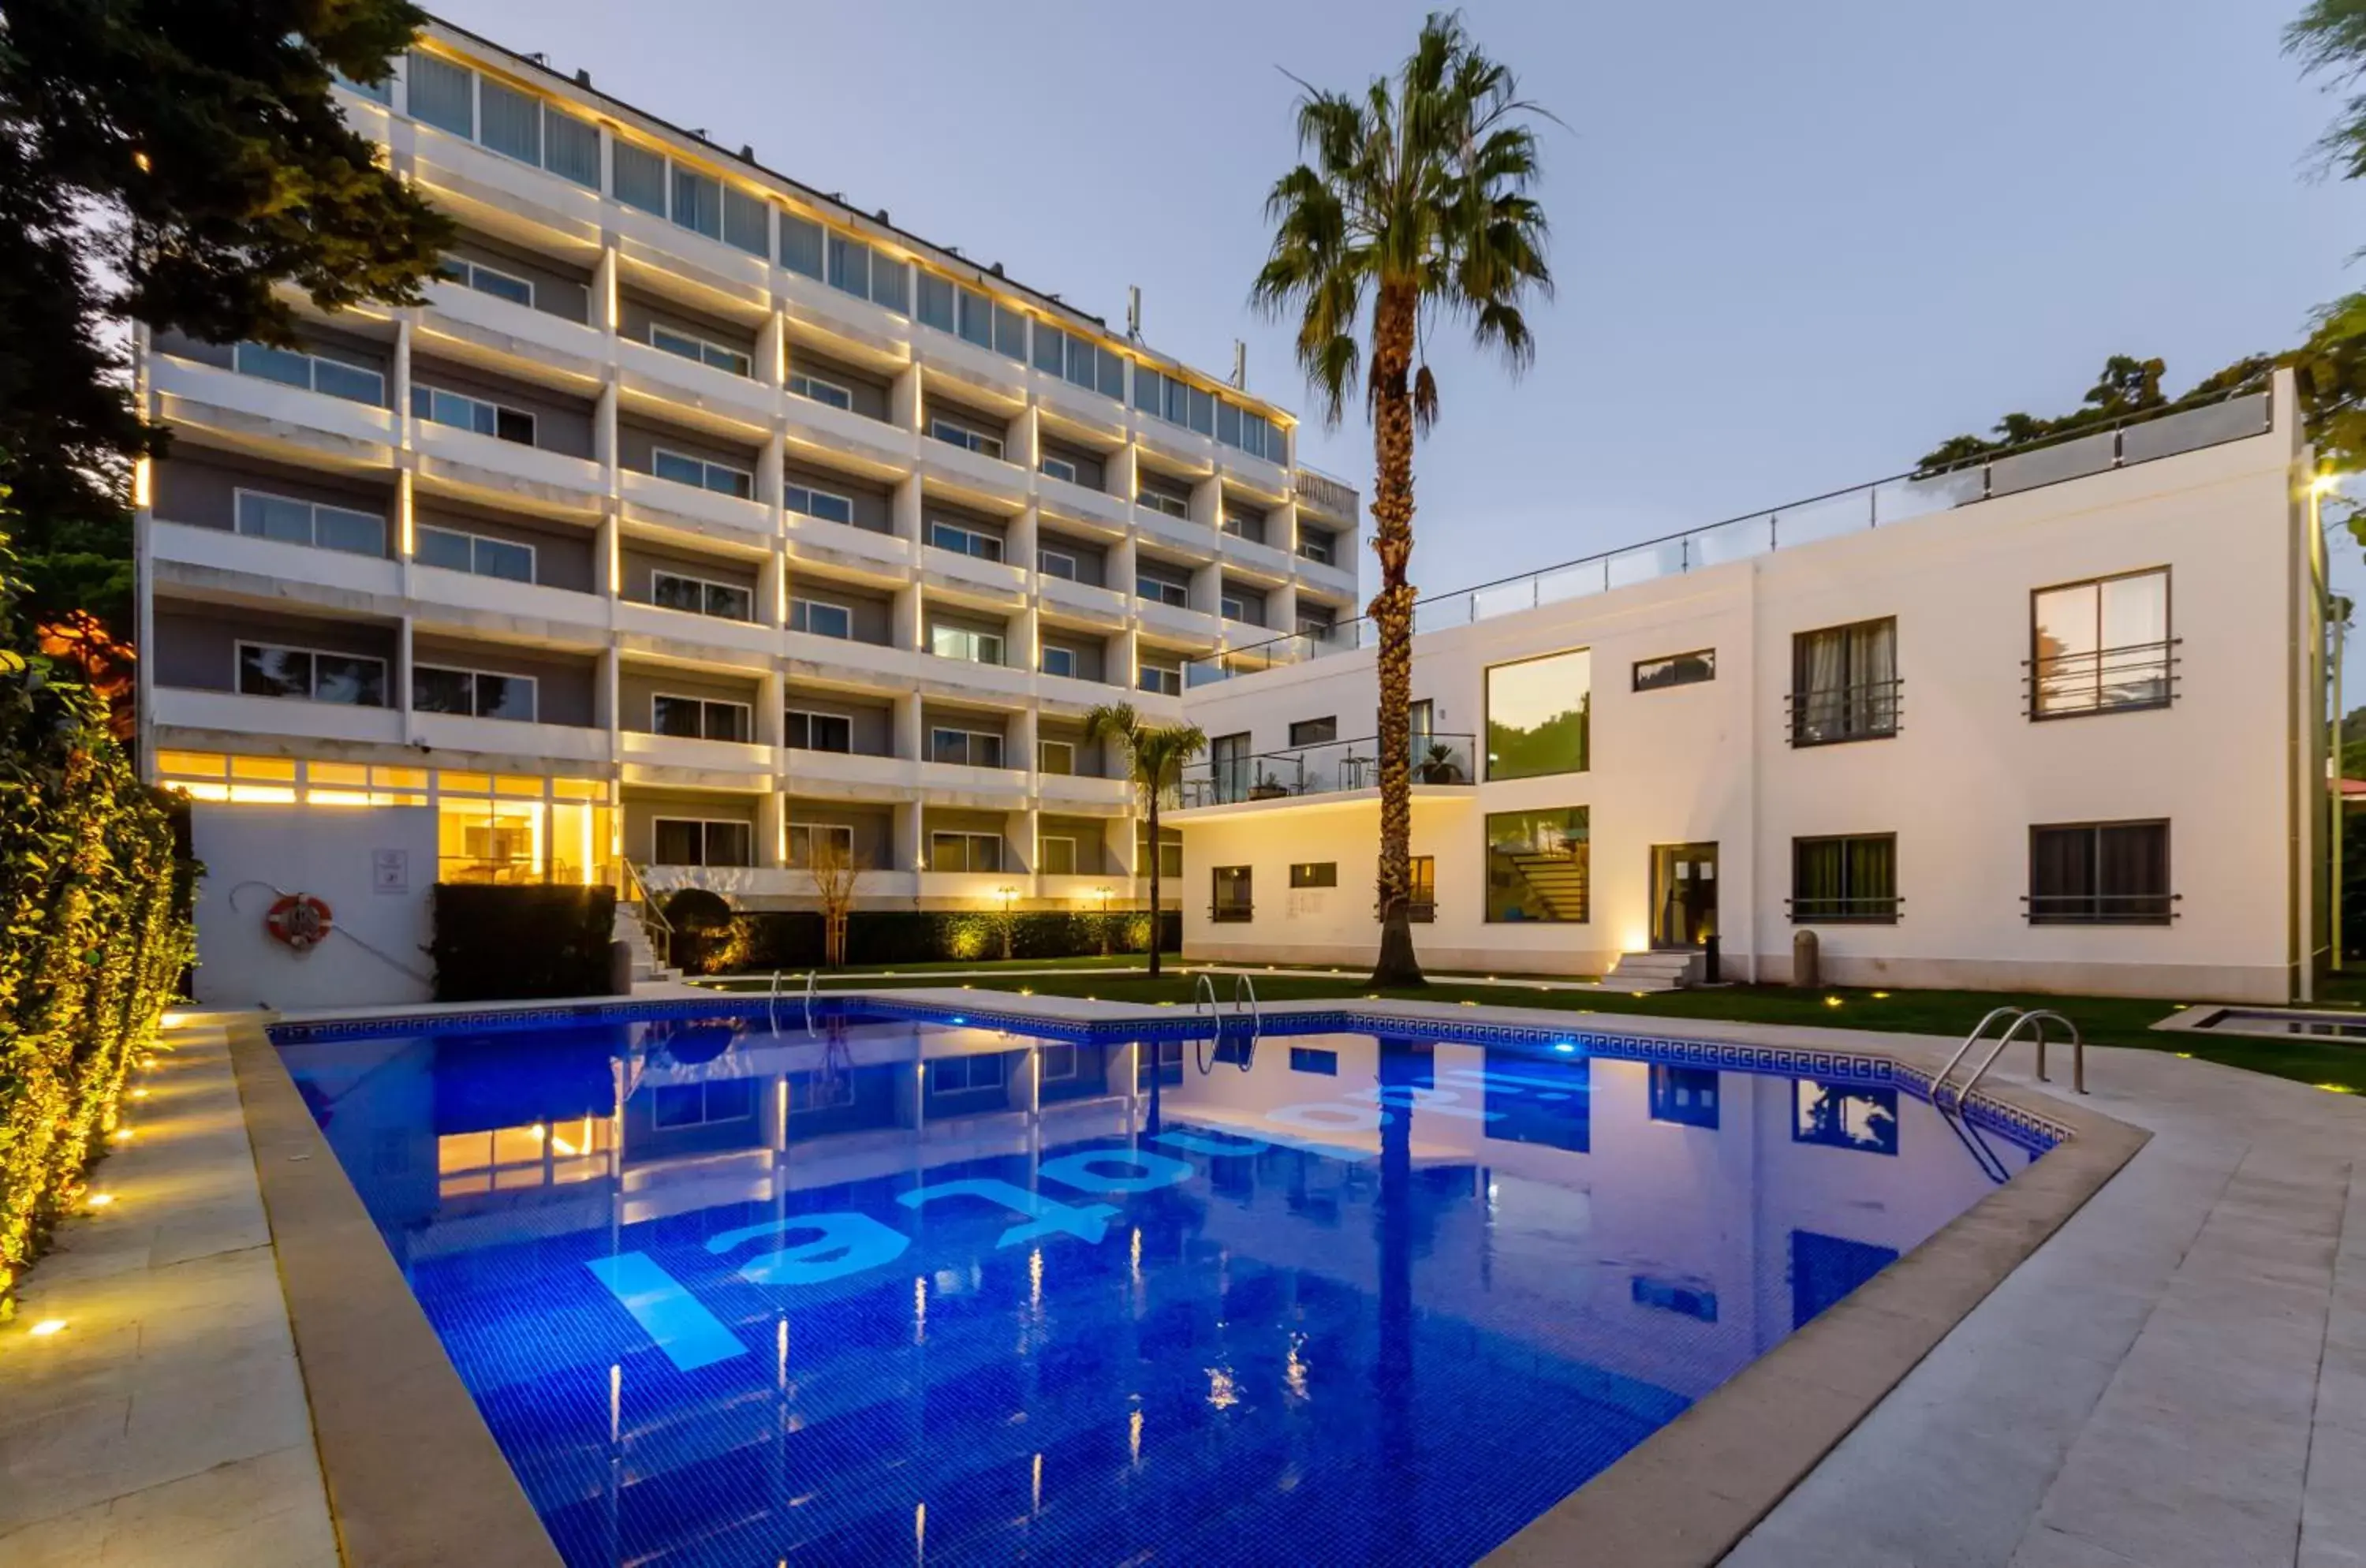 Property building, Swimming Pool in Hotel Lido